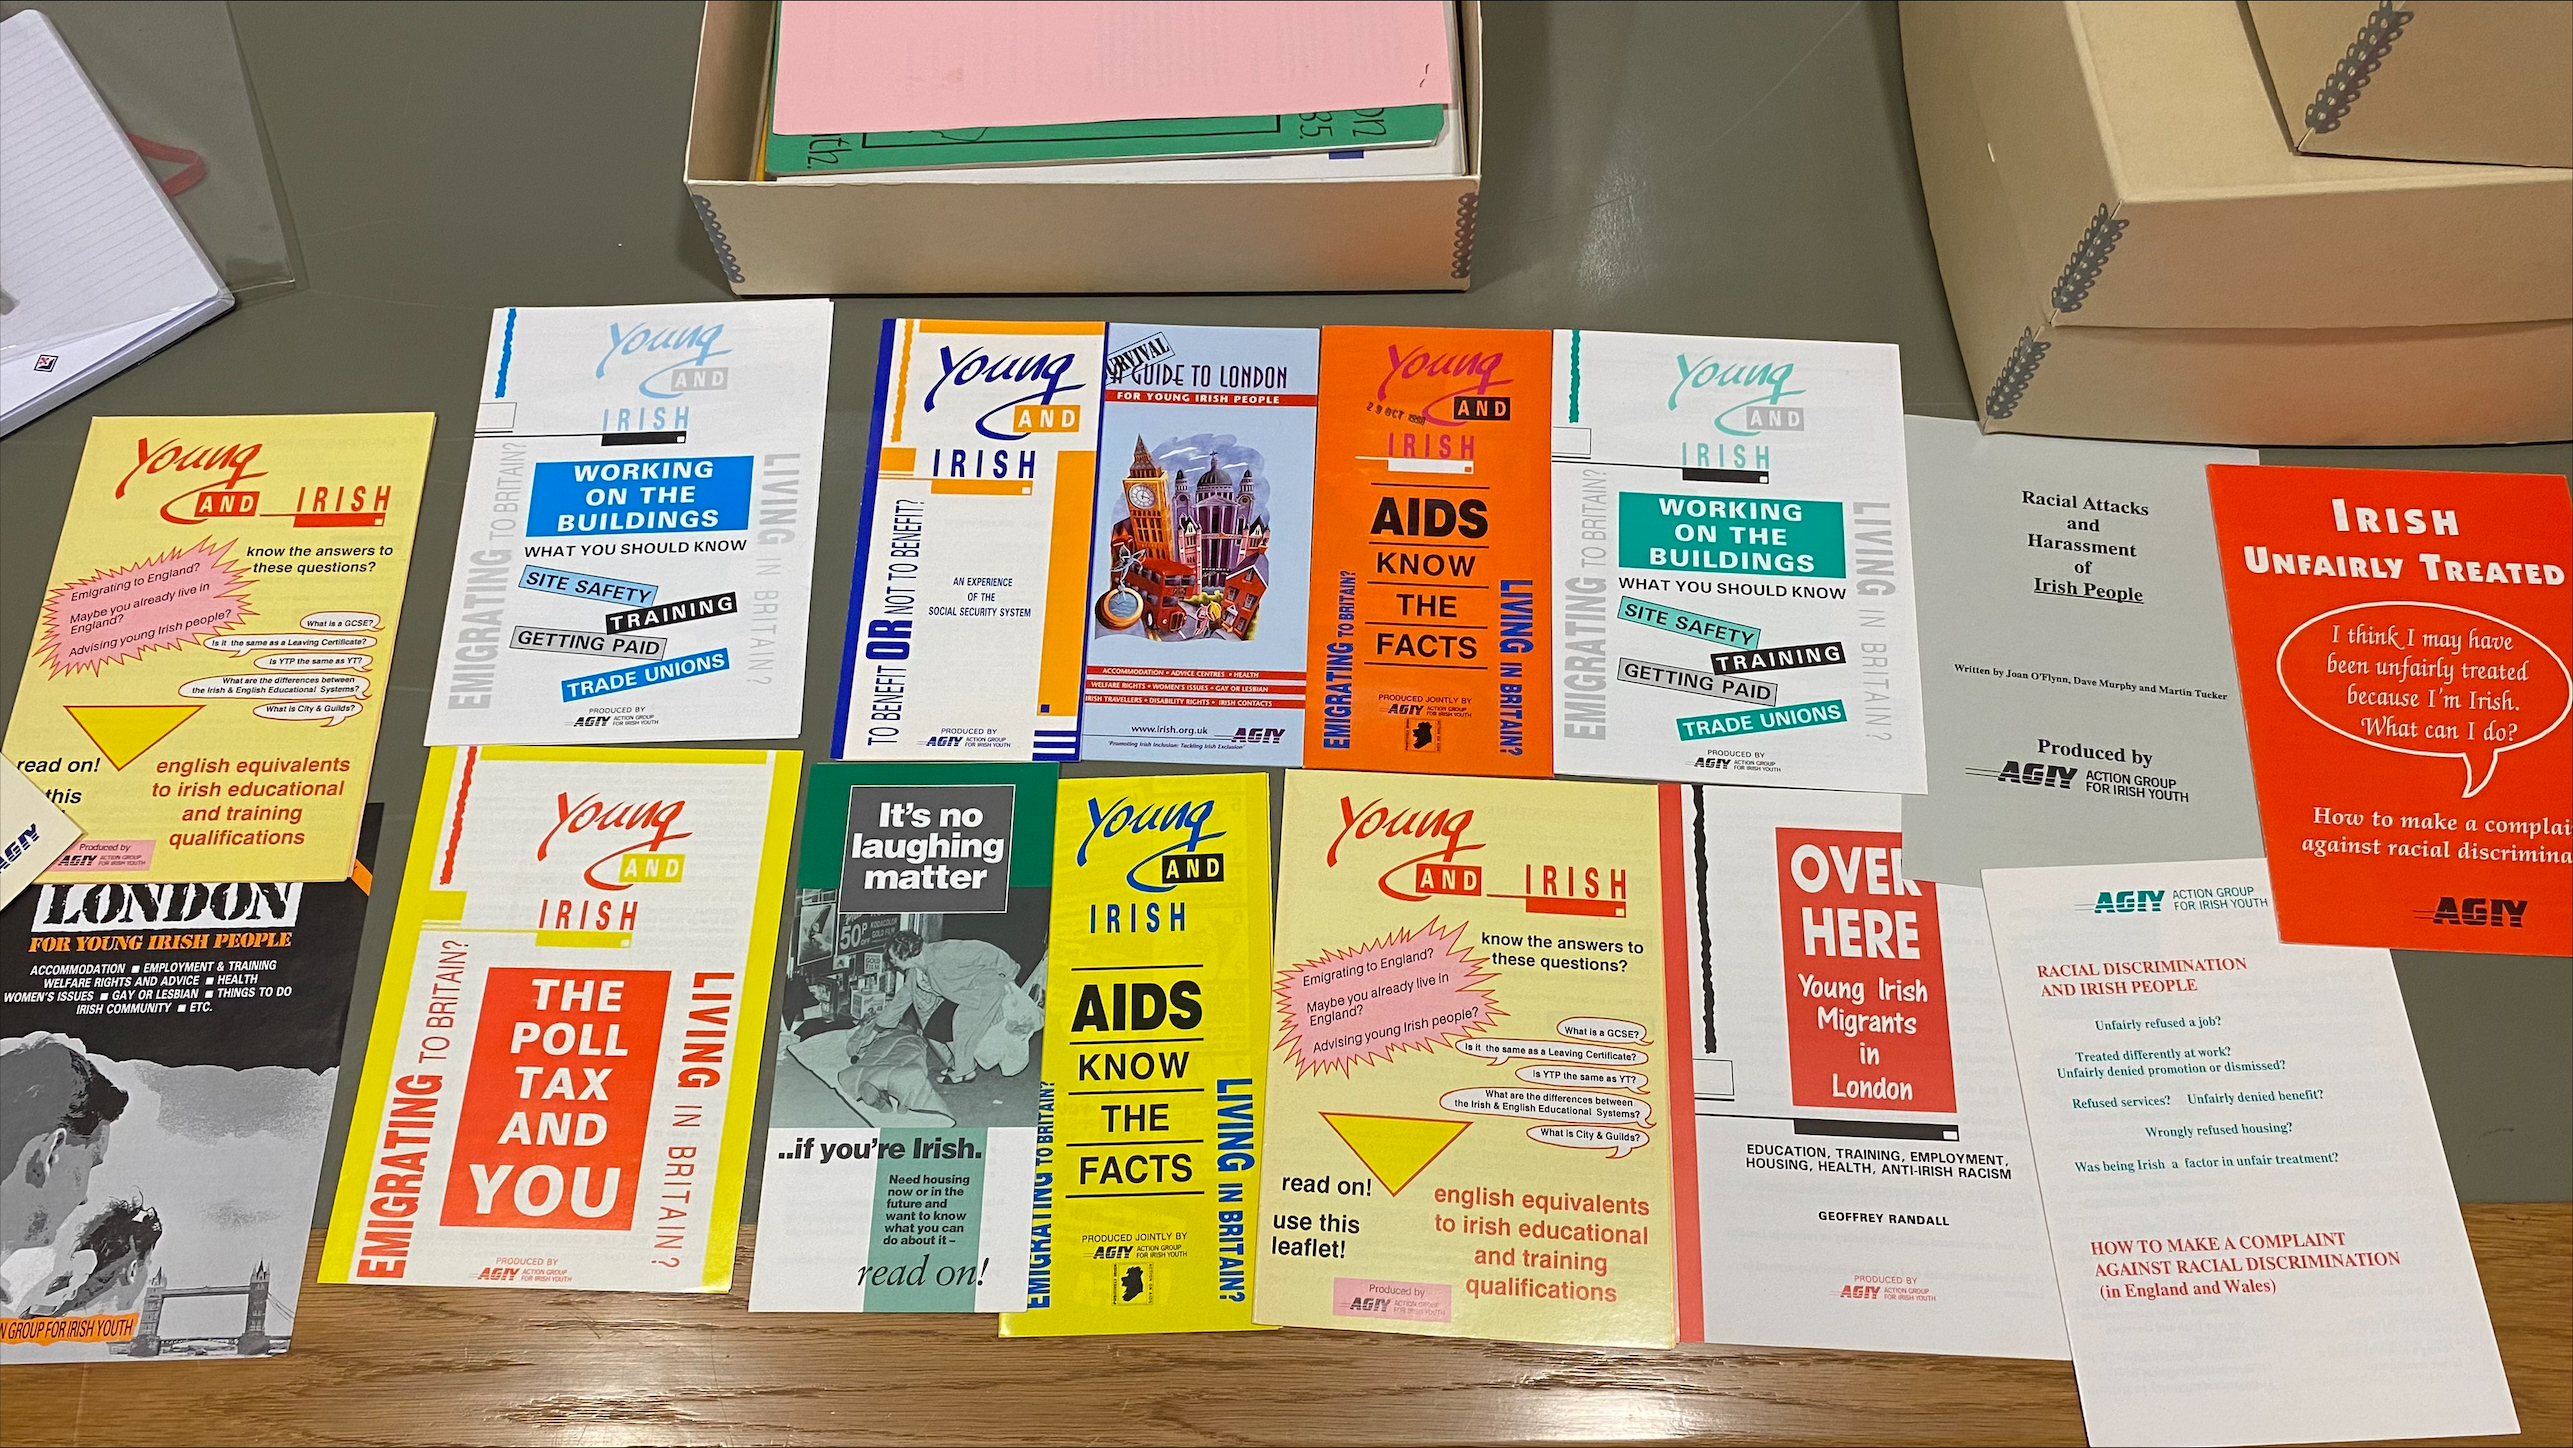 A display of archive leaflets and pamphlets about Irish LGBTQ+ activities and groups in past table on LGBT+